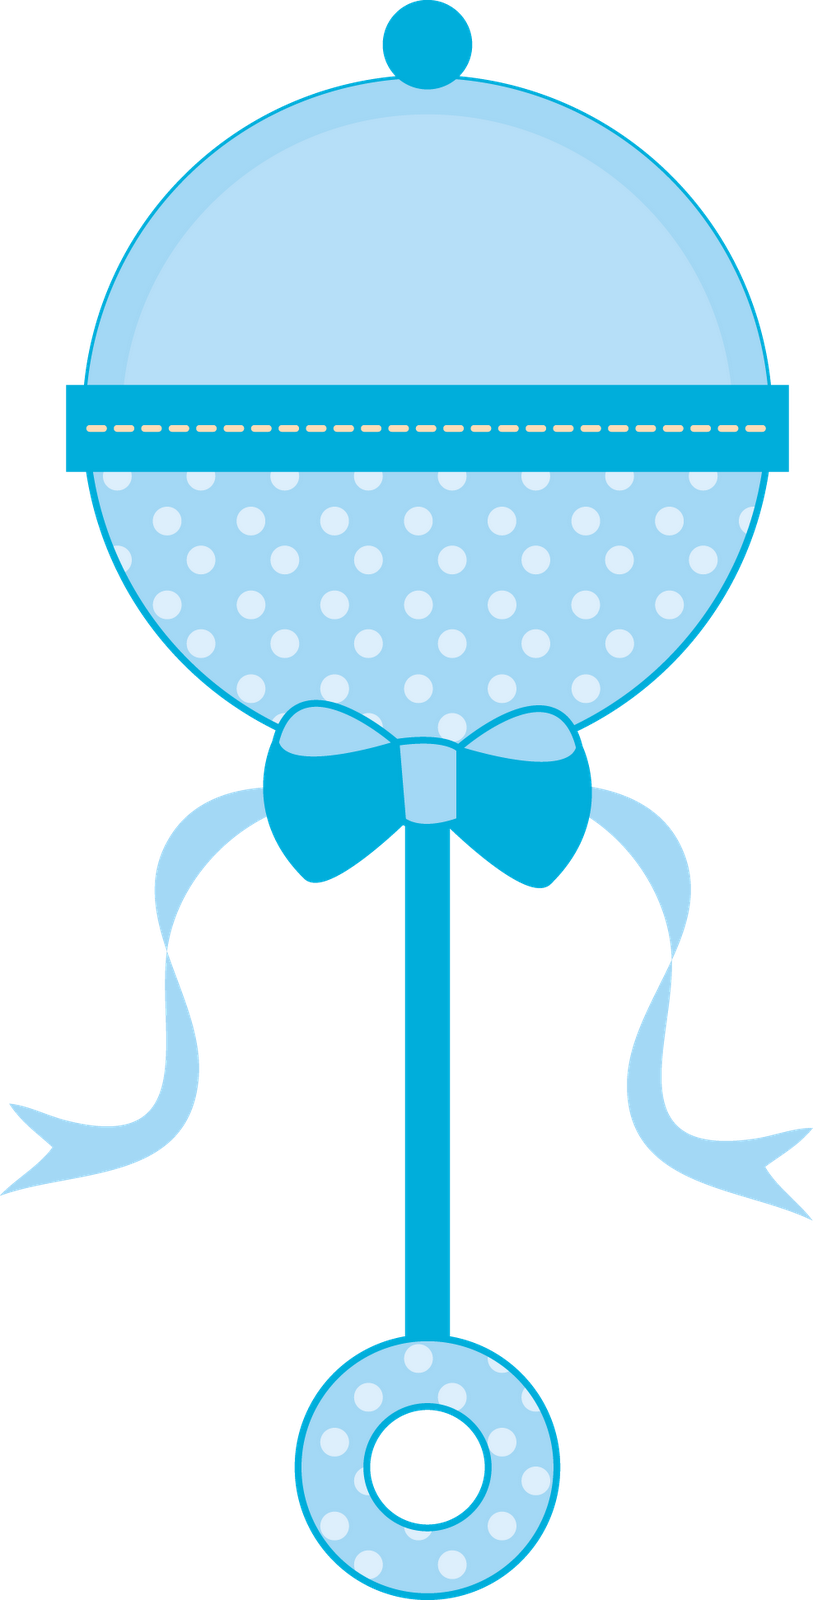 Pacifier clipart baby design. Rattle blue png impress